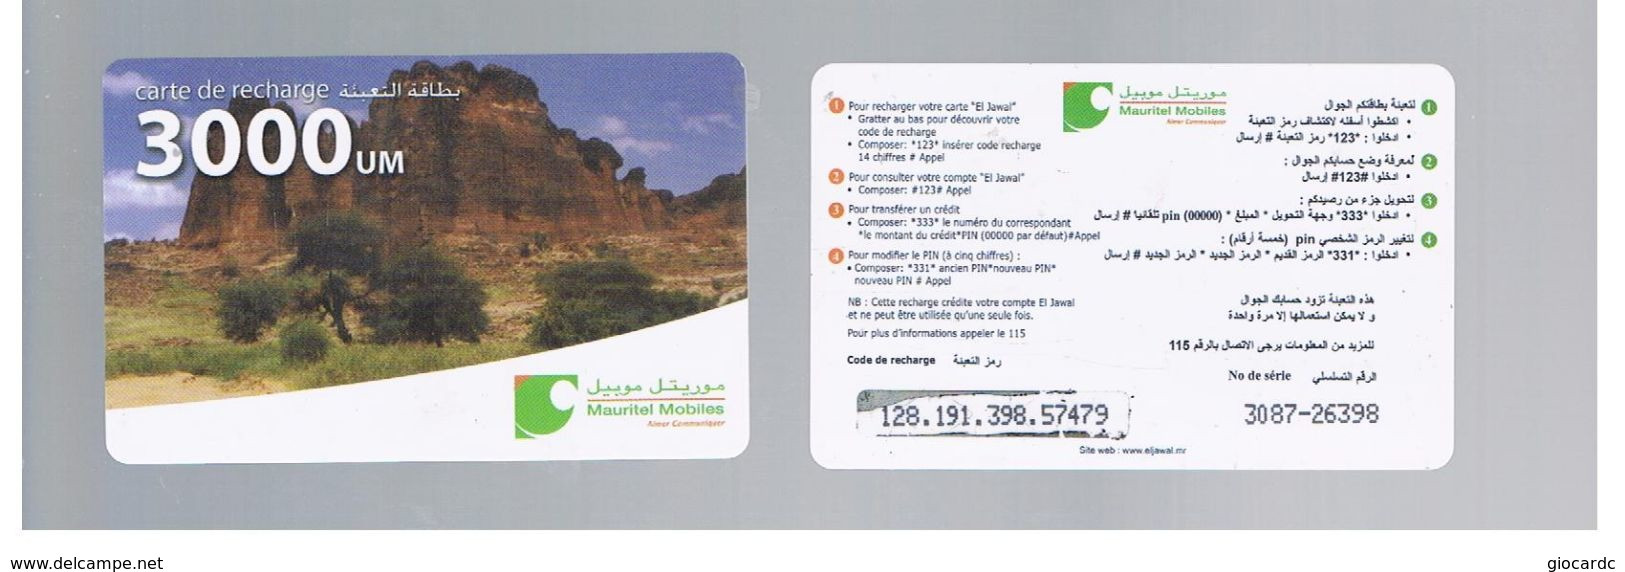 MAURITANIA   - MAURITEL MOBILES (GSM RECHARGE) - MOUNTAINS AND TREES  3000      - USED  -  RIF. 9166 - Montagne